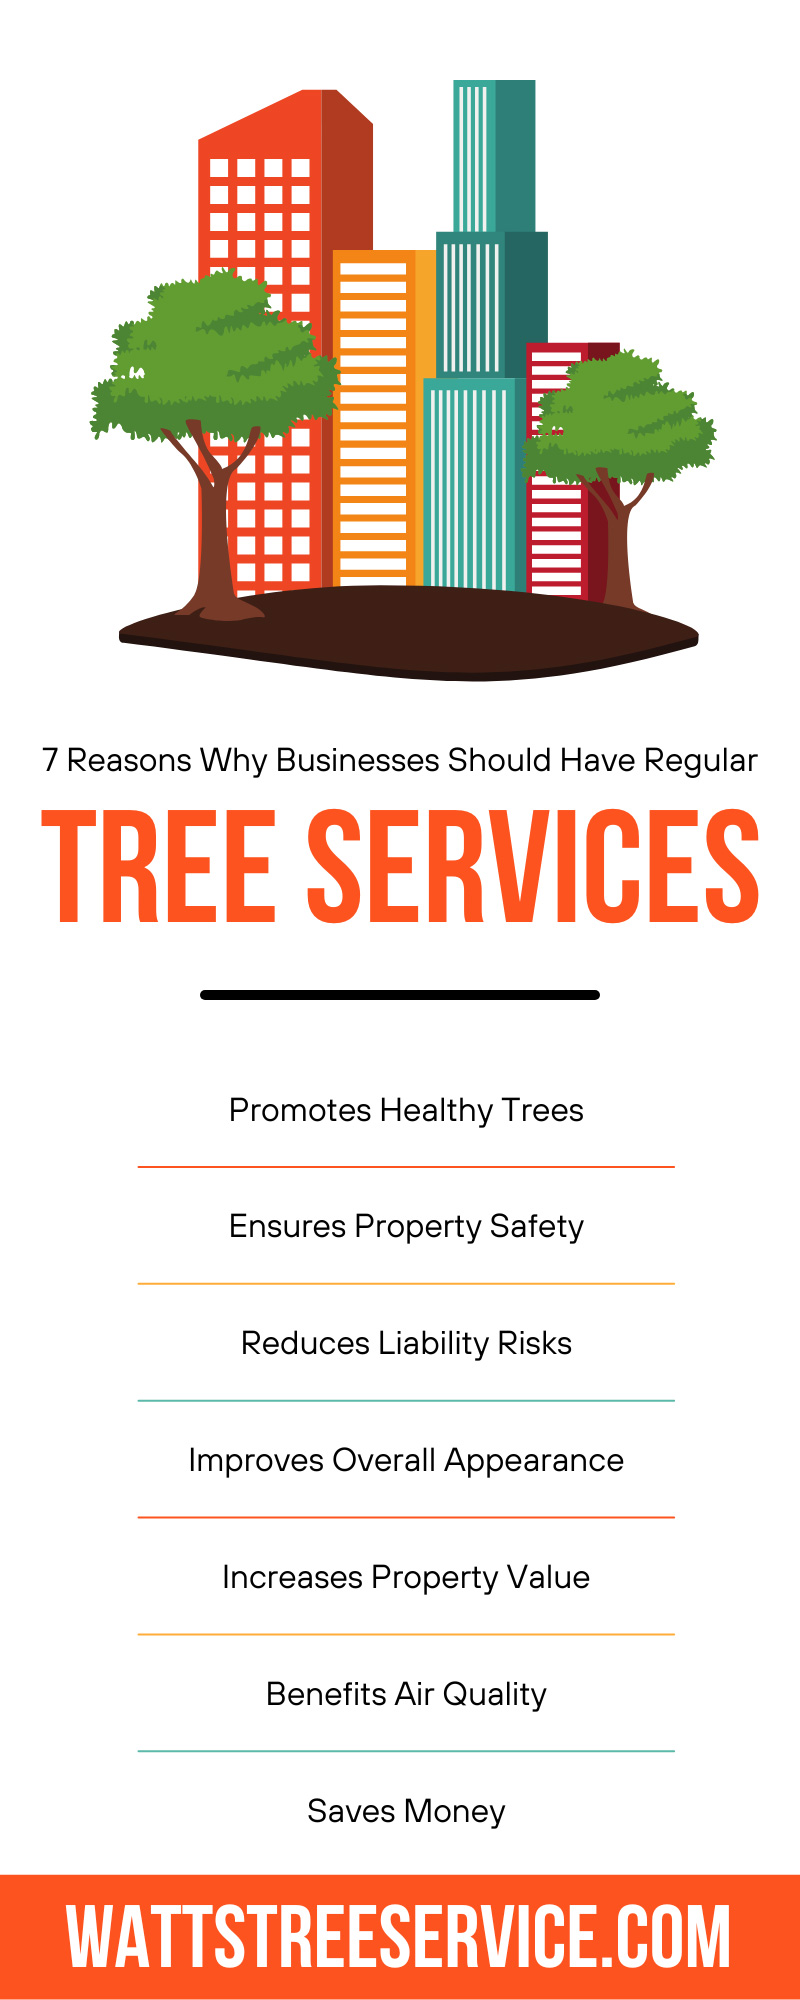 7 Reasons Why Businesses Should Have Regular Tree Services